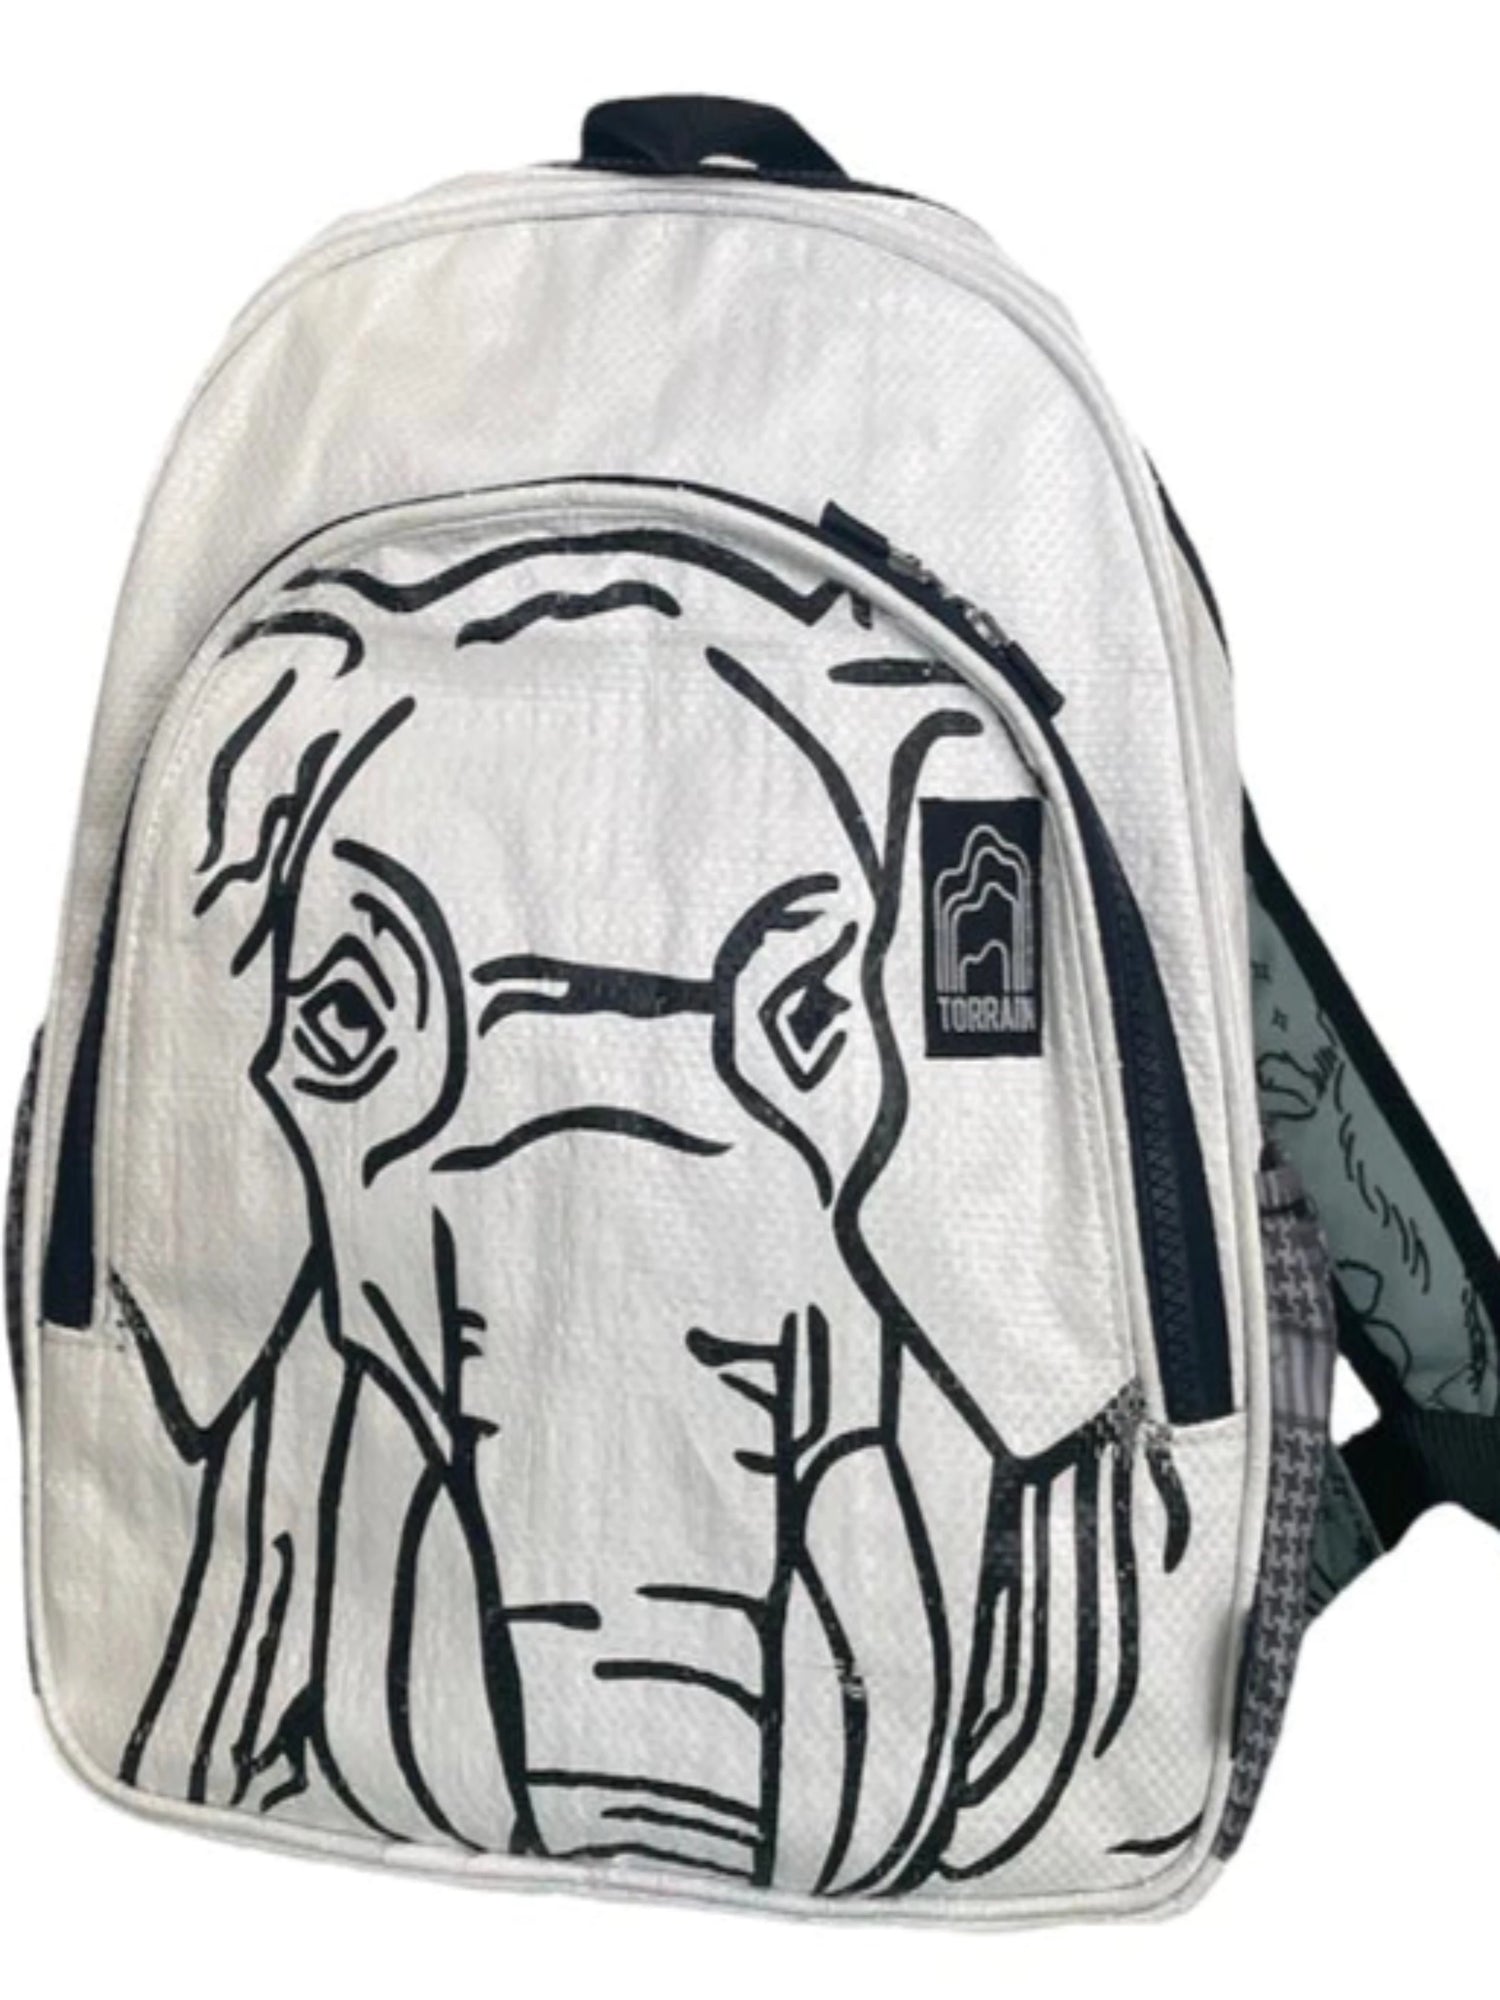 KID'S RECYCLED BACK PACK - THE LITTLE EAGLE BOUTIQUE